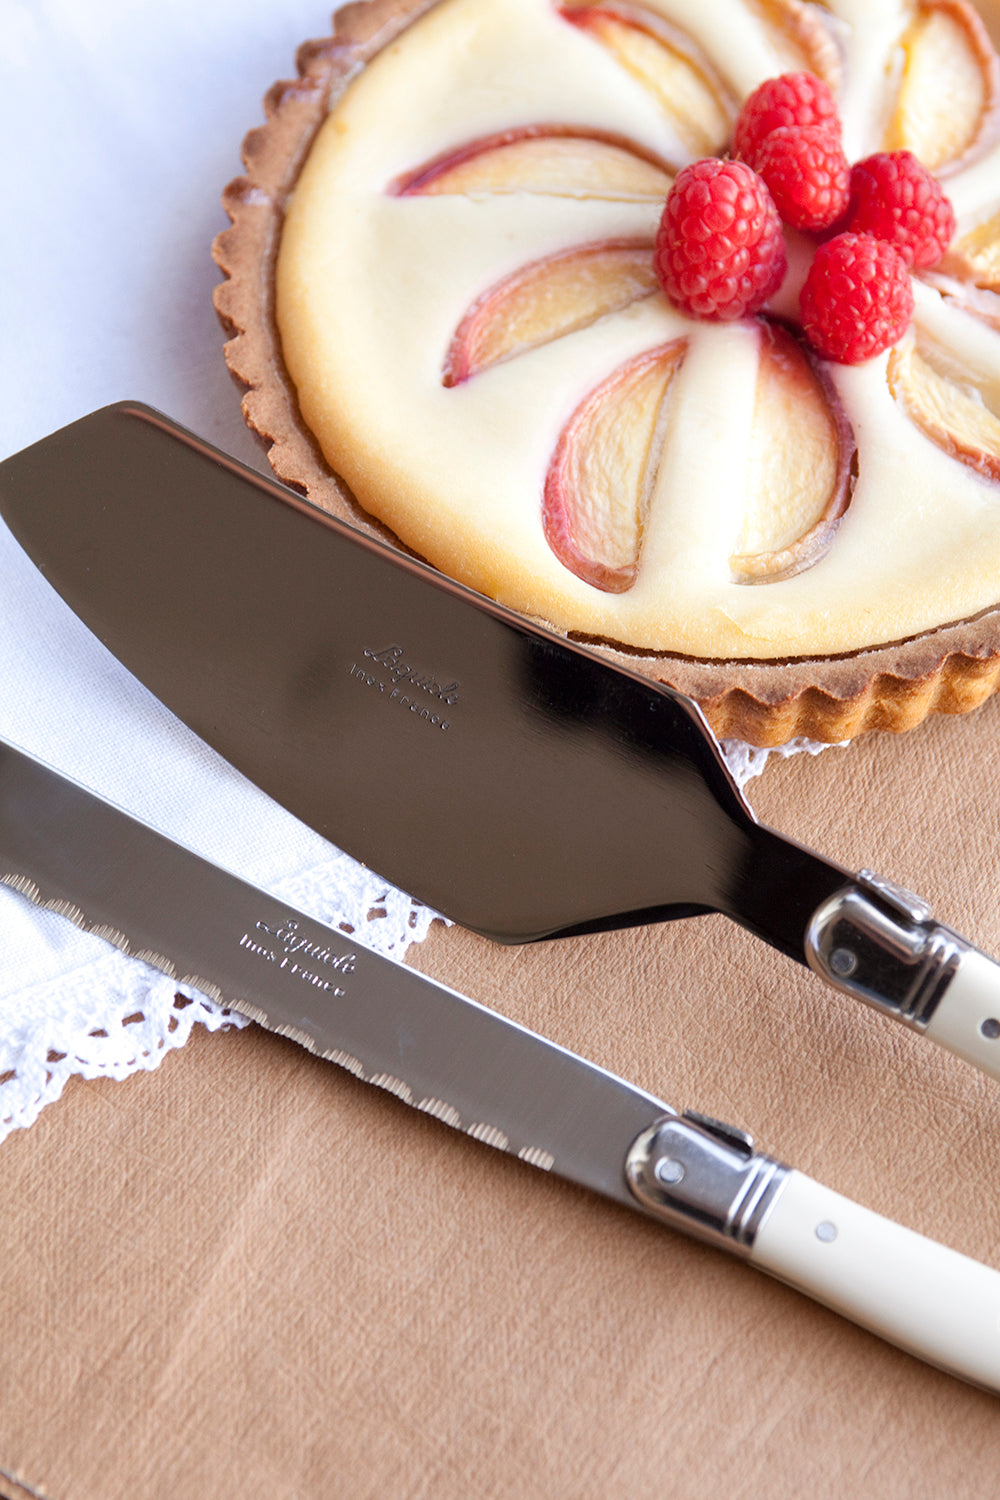 Laguiole Ivory Cake Set in Wood Box (Cake Slicer and Bread Knife) Cutlery Laguiole Brand_Laguiole Kitchen_Dinnerware Kitchen_Kitchenware Knife Sets Laguiole Spring Collection 6_15_16_LG_12